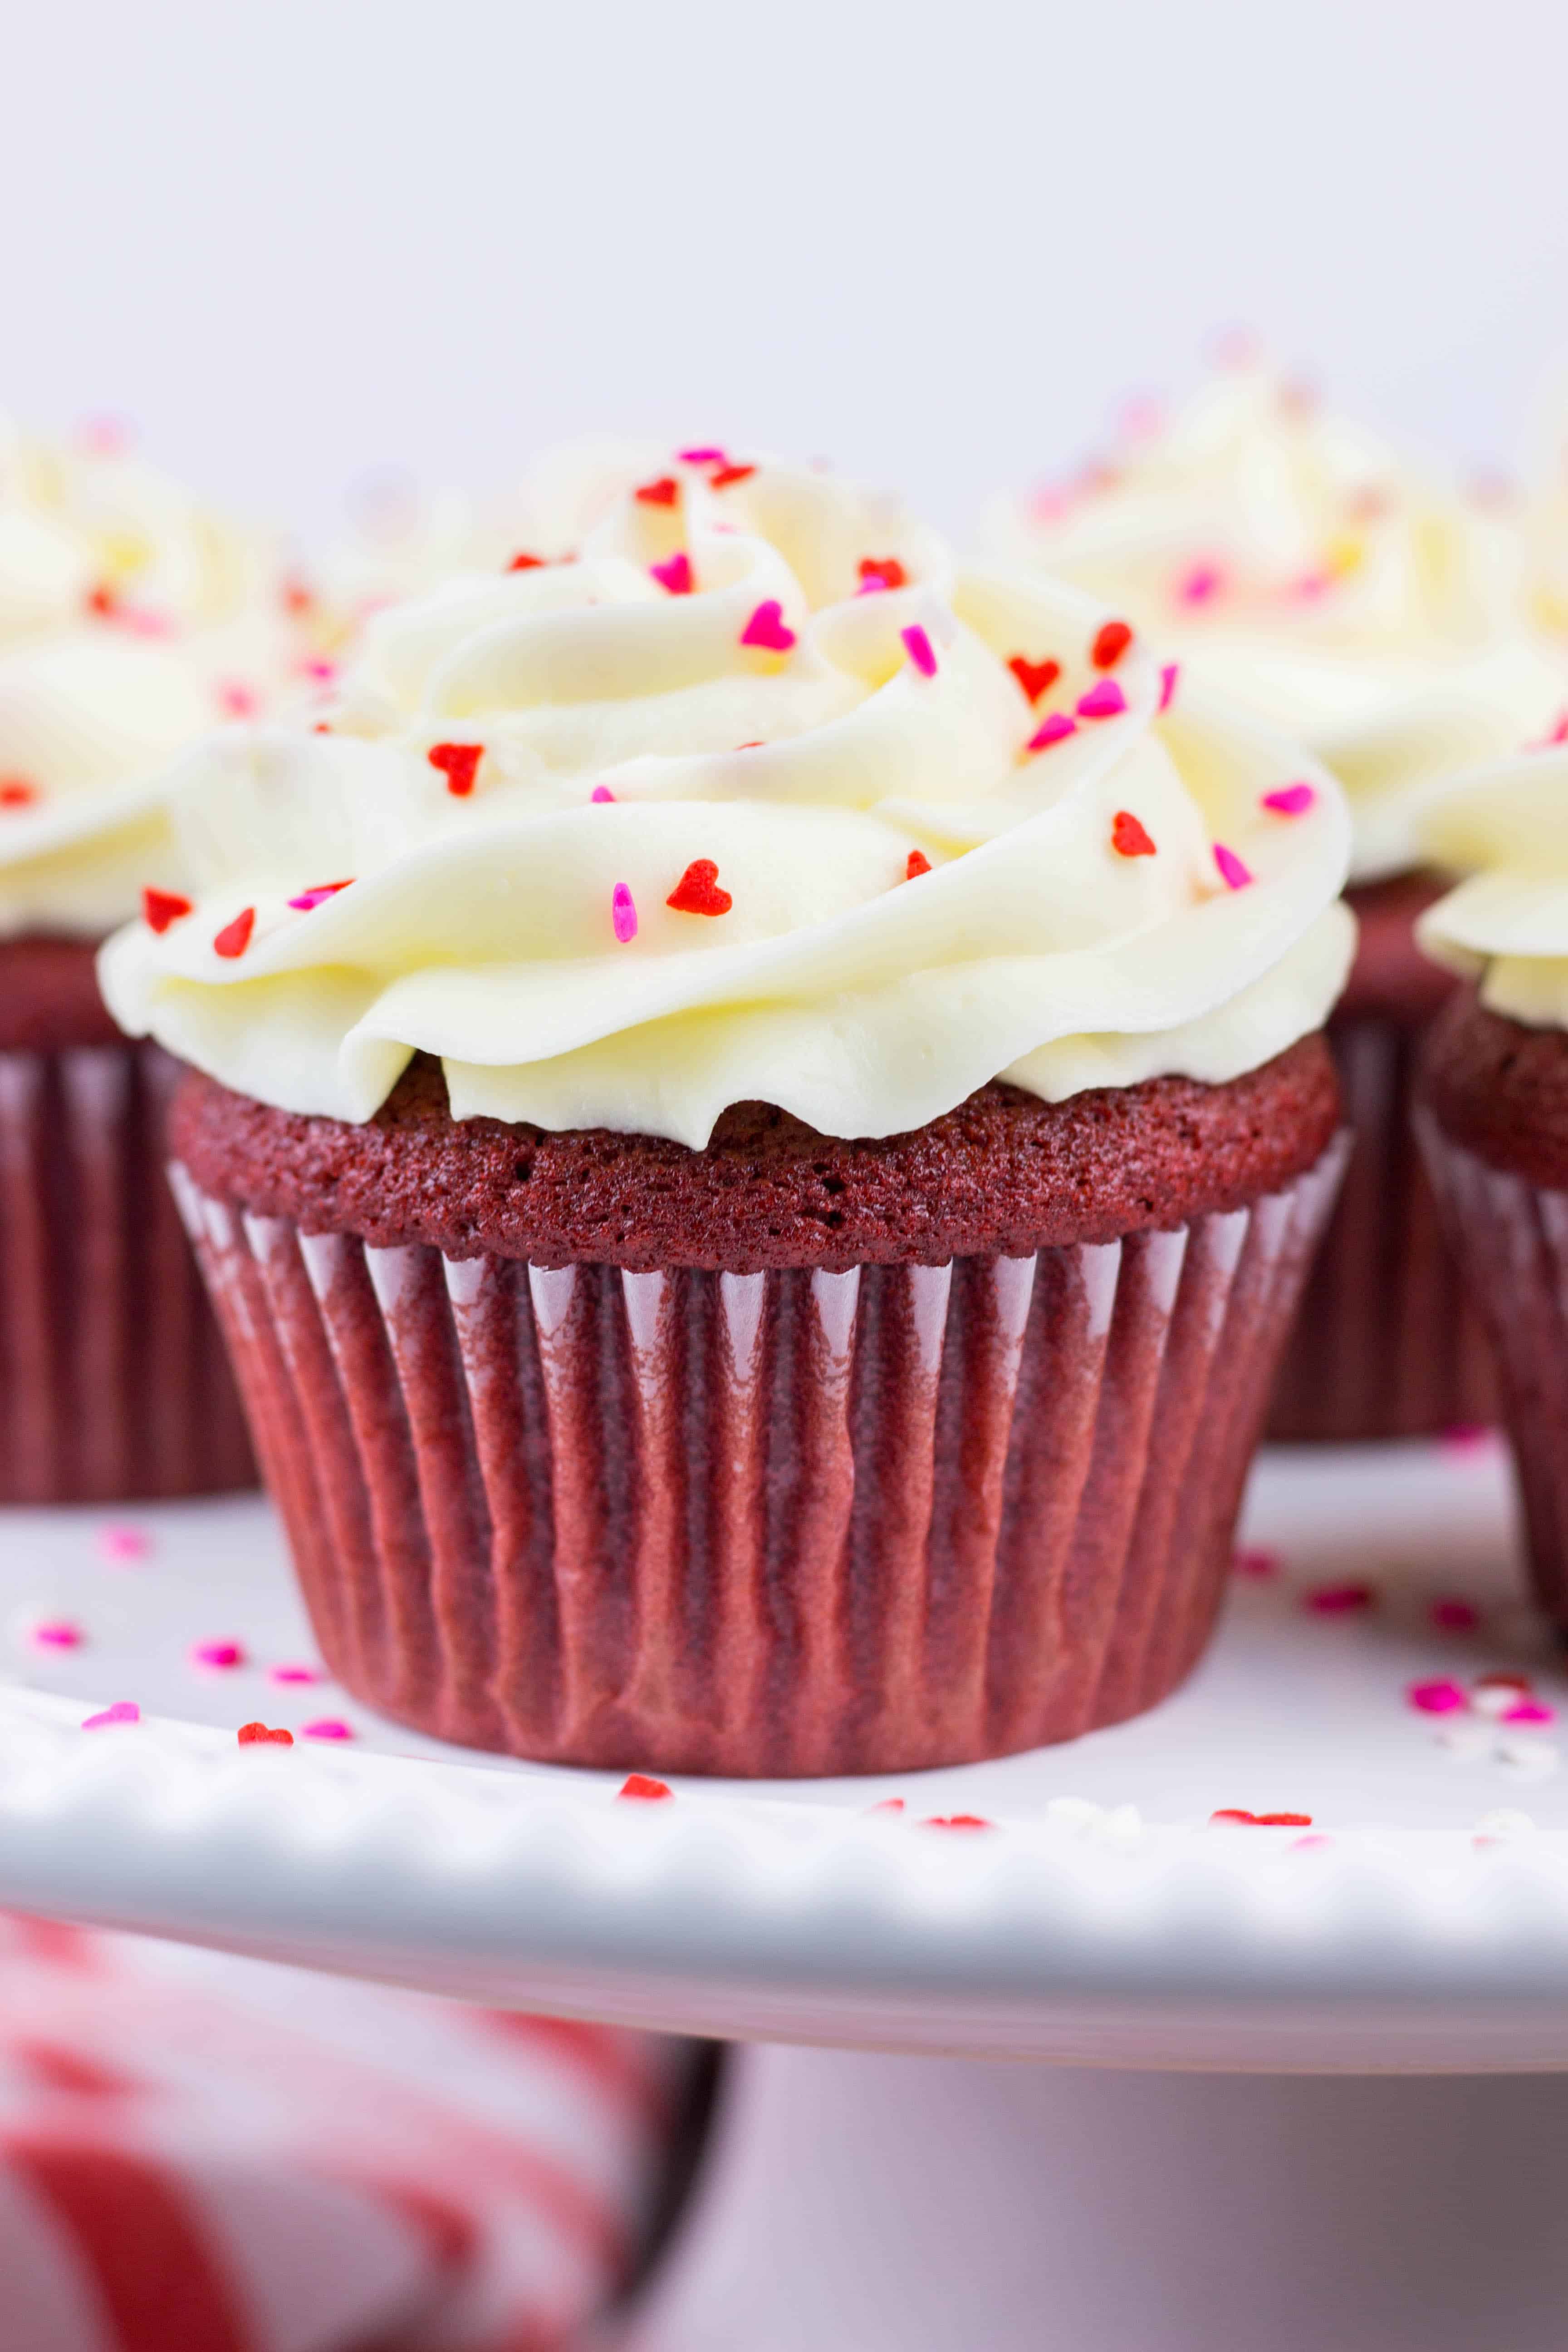 Red Velvet Cupcakes with cream cheese frosting is a perfect St. Valentine’s Day recipe to surprise your loved ones. These easy to make from scratch cupcakes will become your favorite!